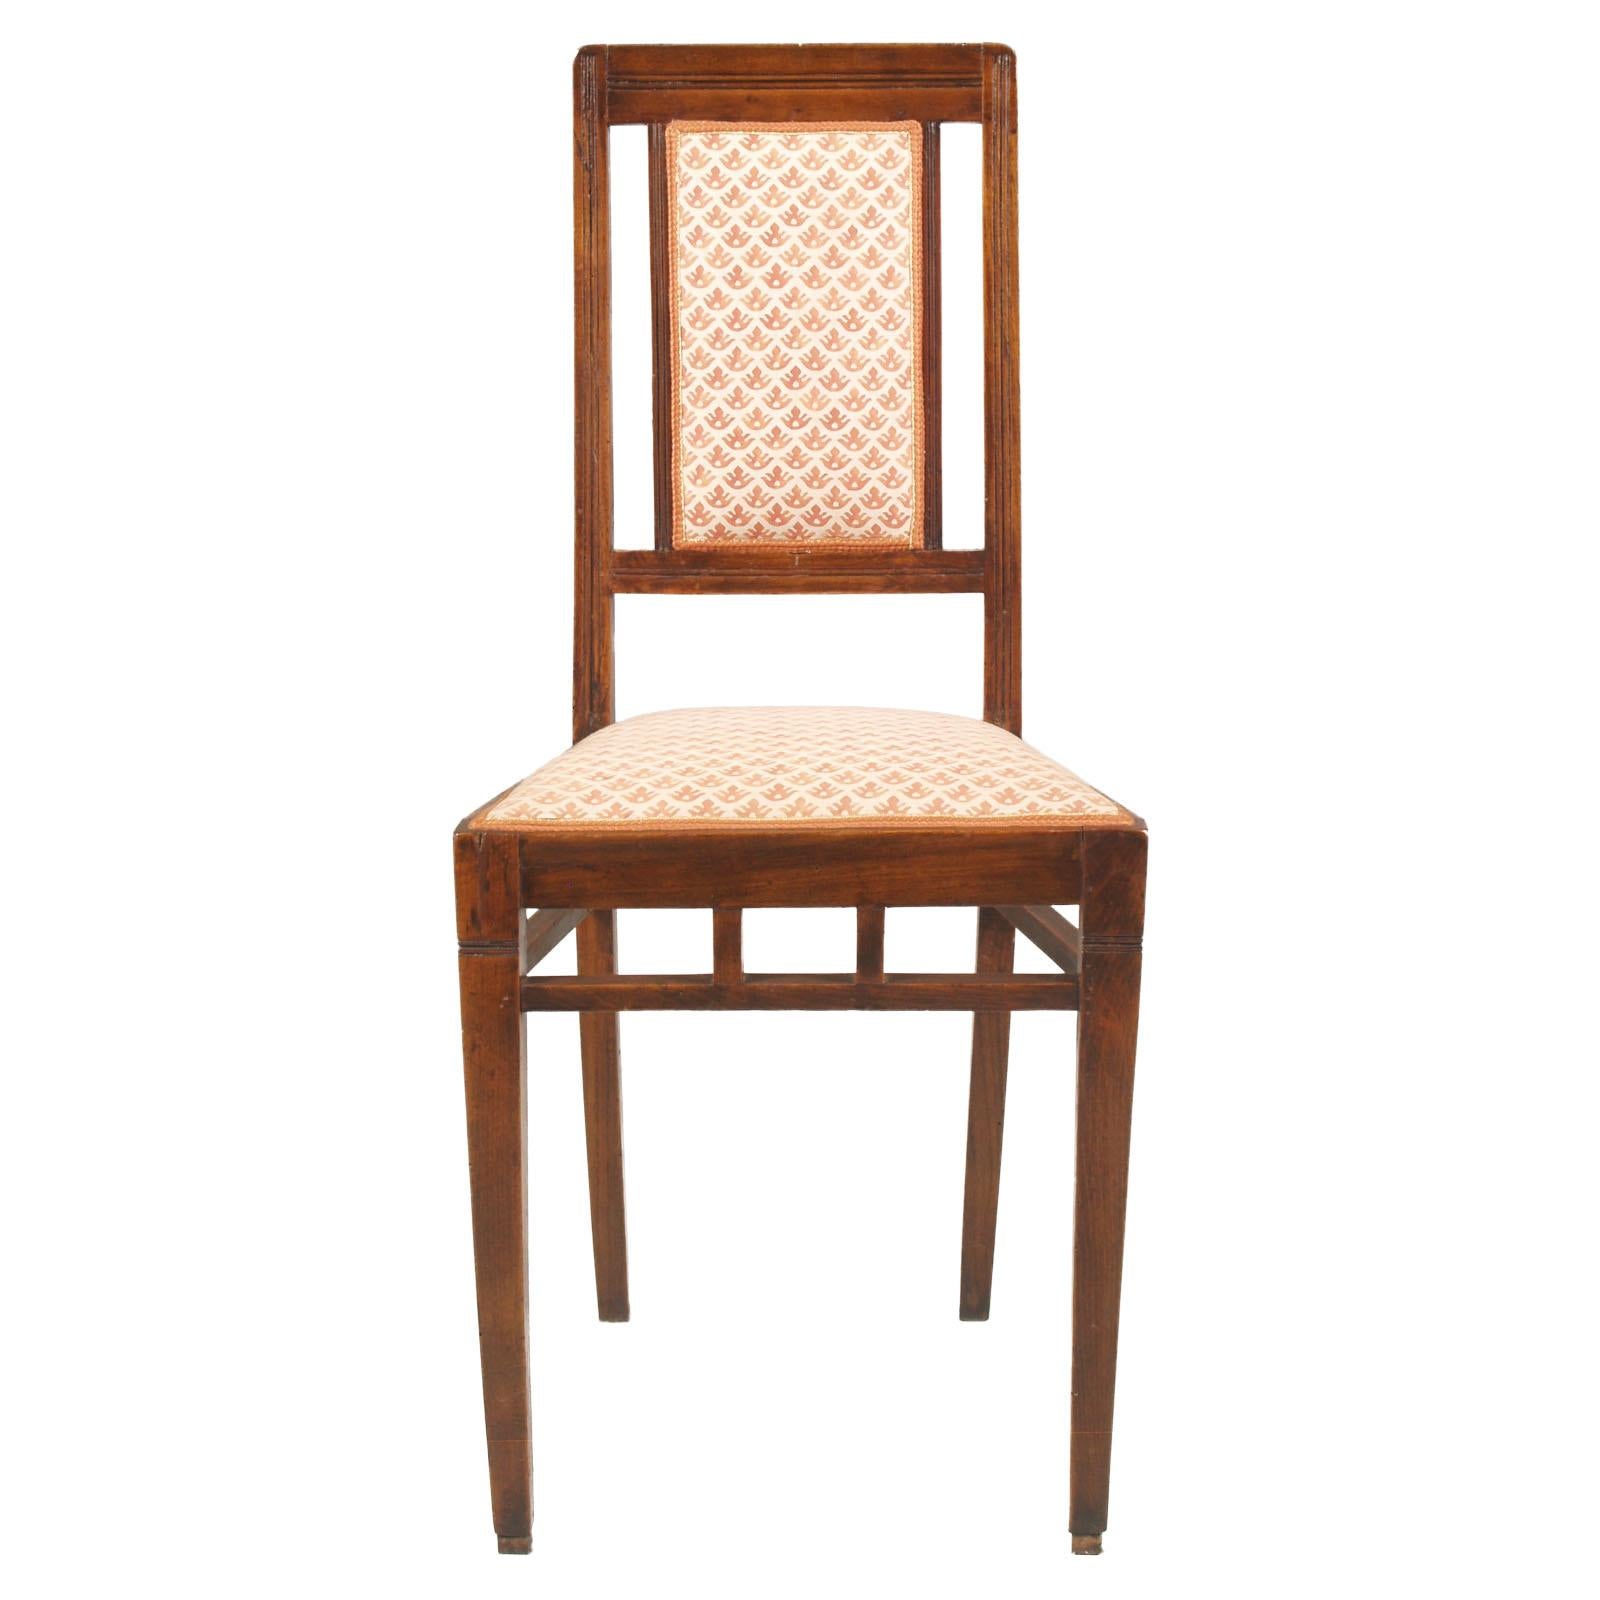 Italian Early 20th Century Set of Four Chairs Art Nouveau in Walnut, Original Upholstery For Sale